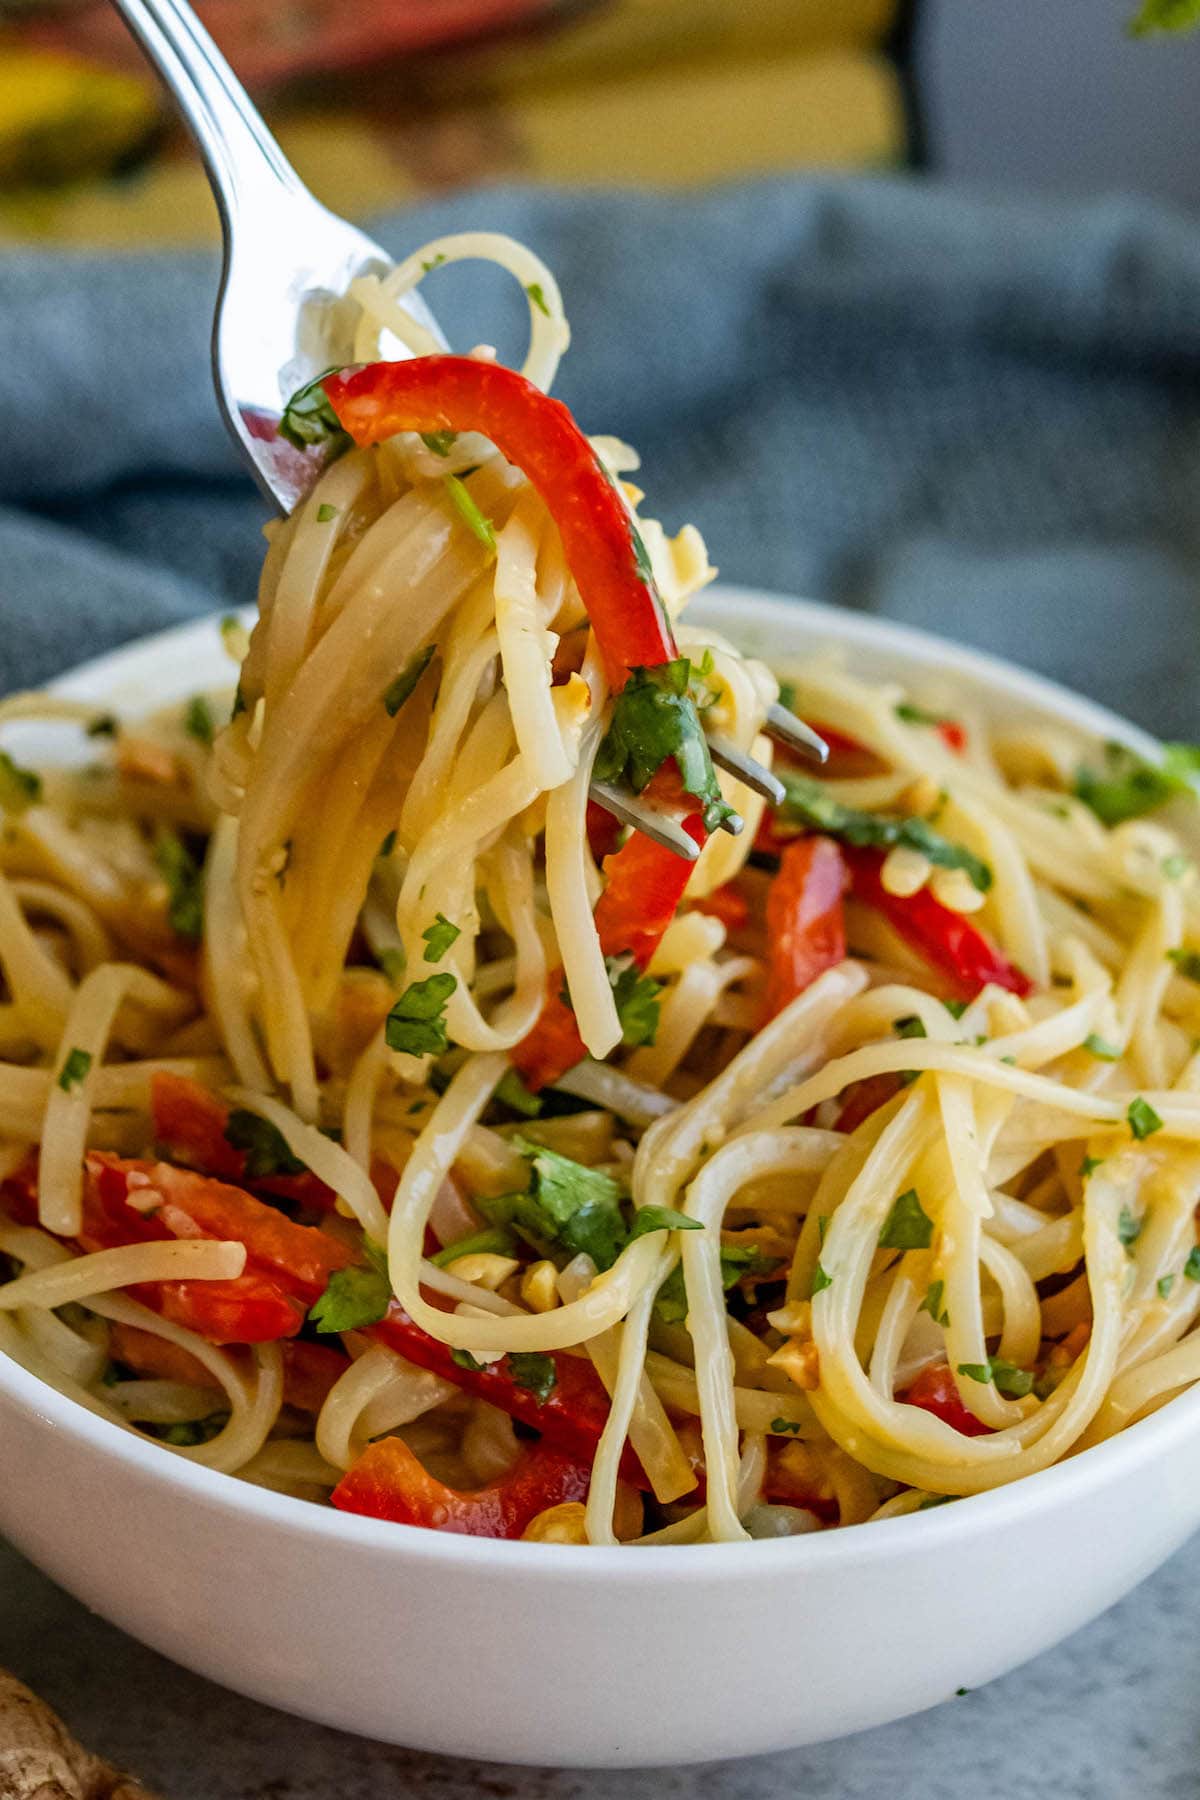 noodles with dressing, peppers, peanuts, and cilantro, limes around it